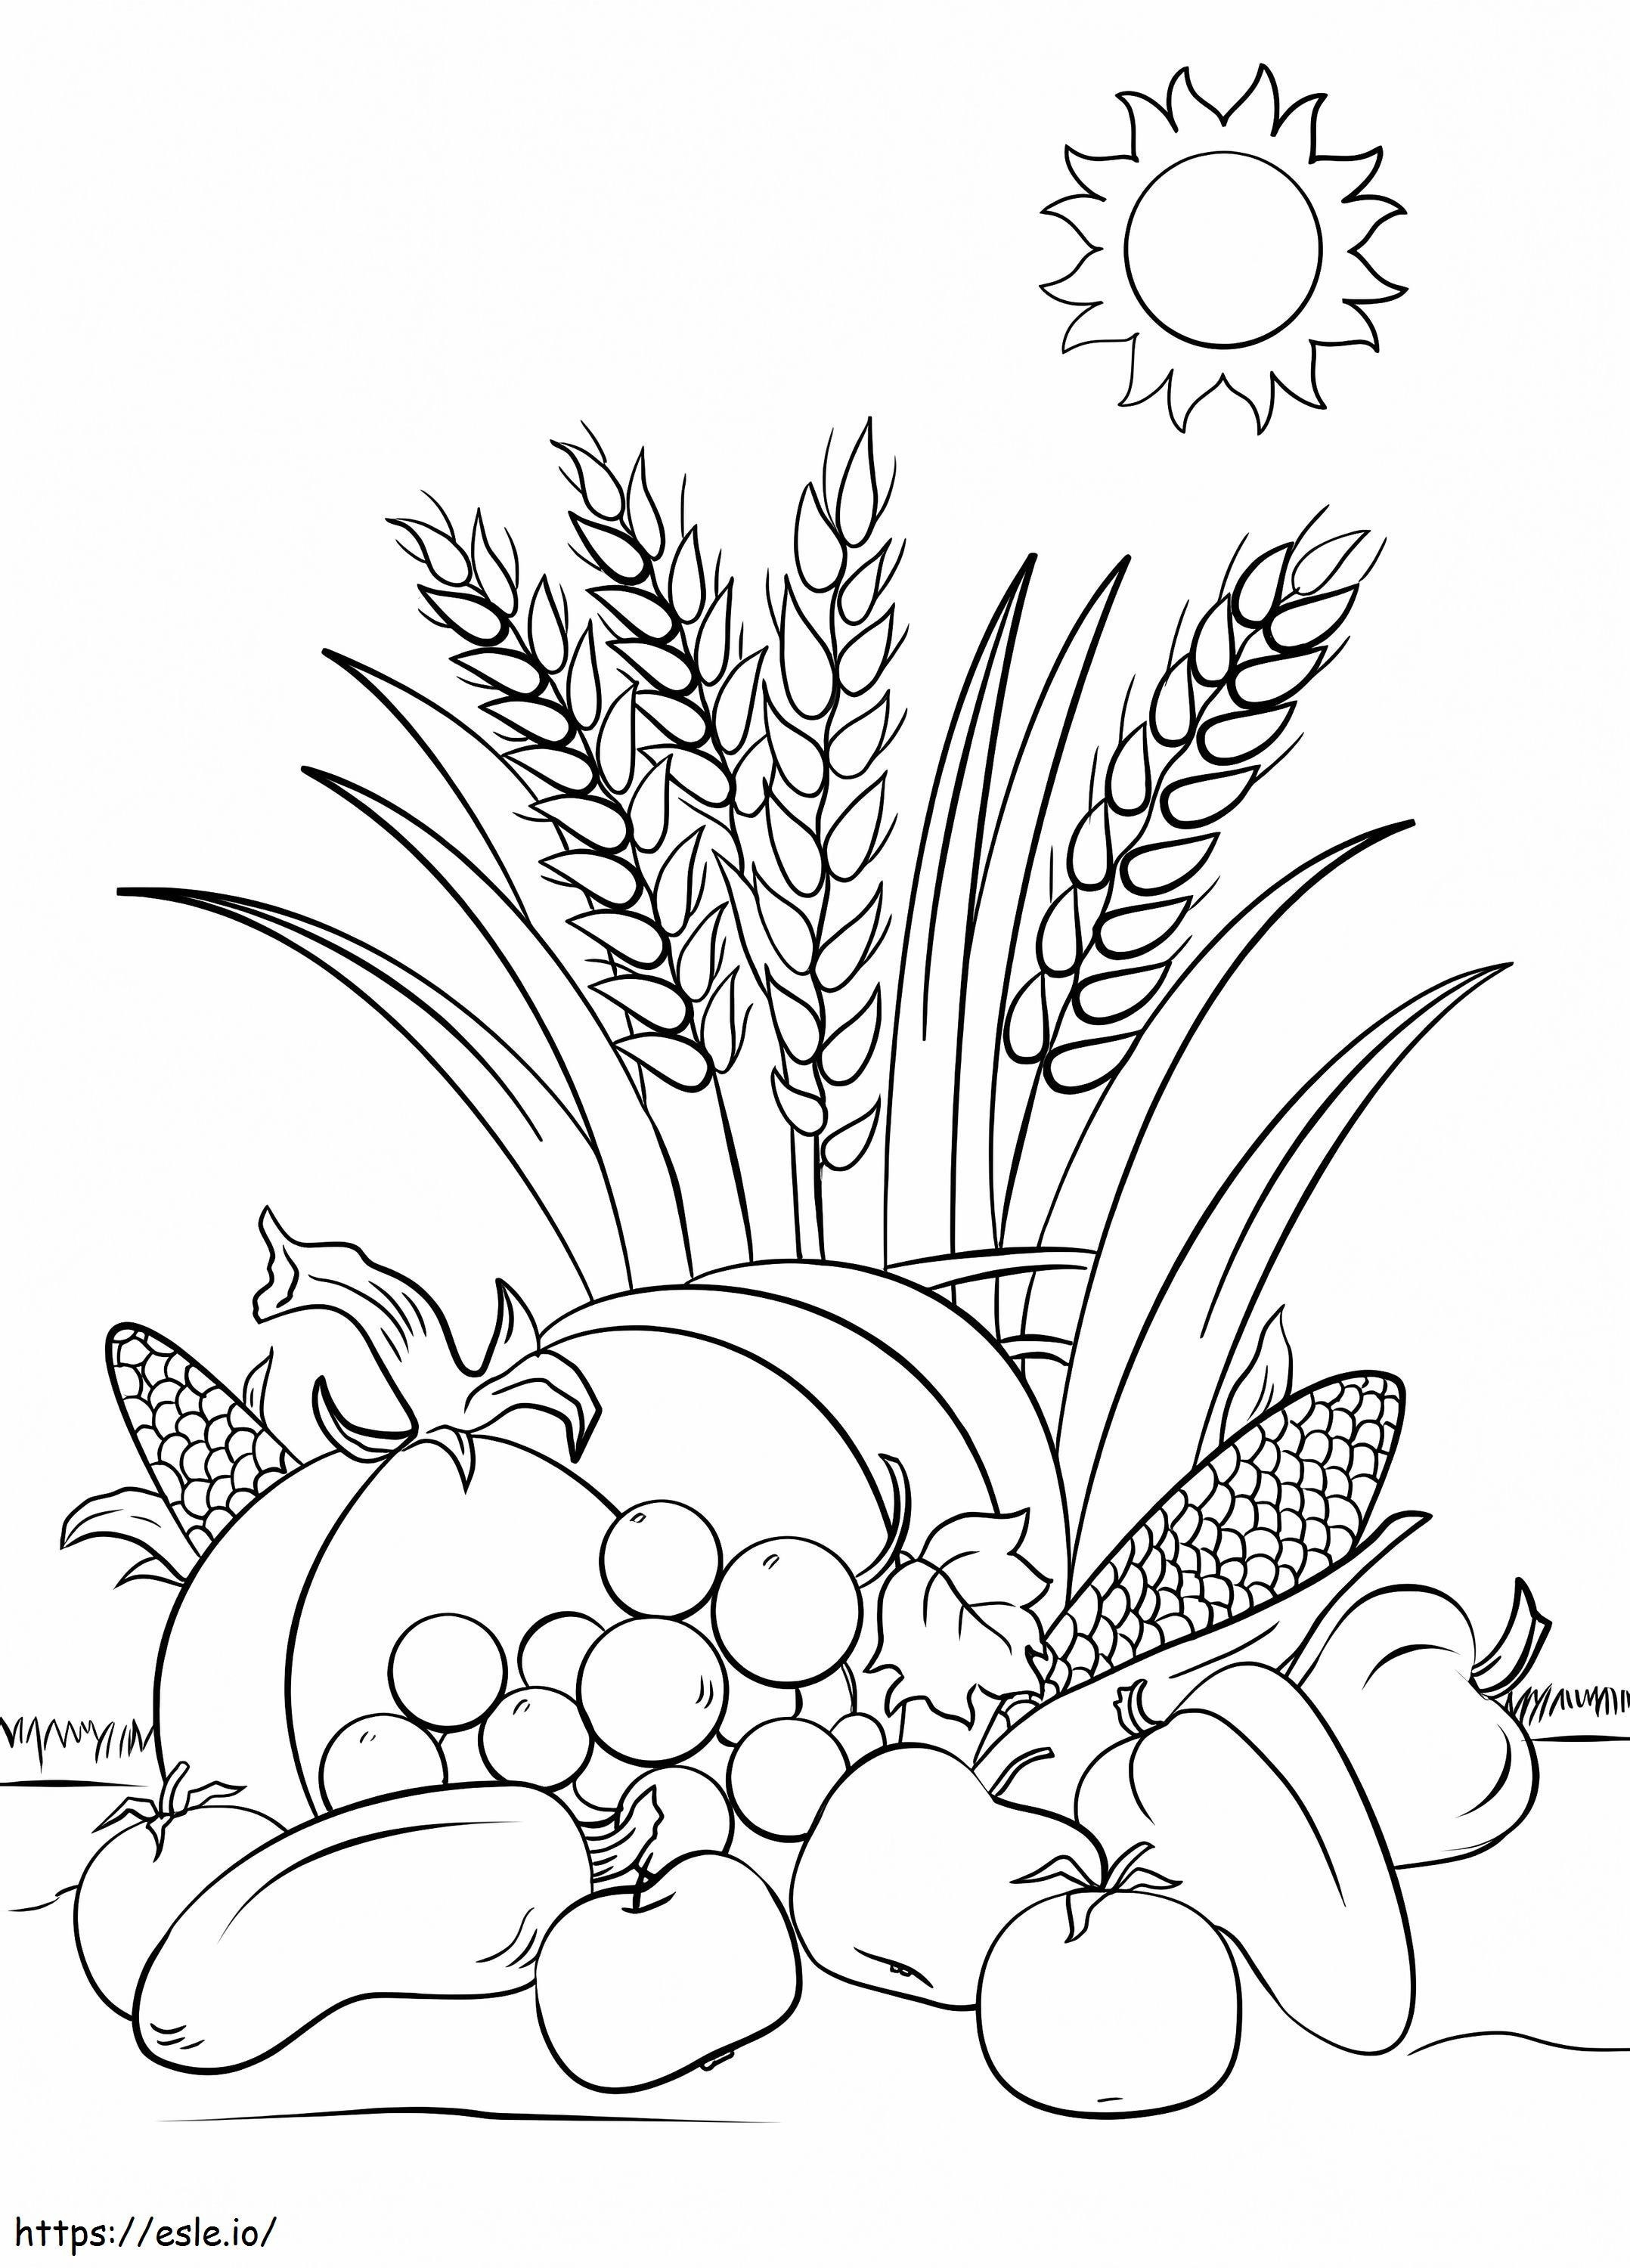 Fall Harvest 2 coloring page